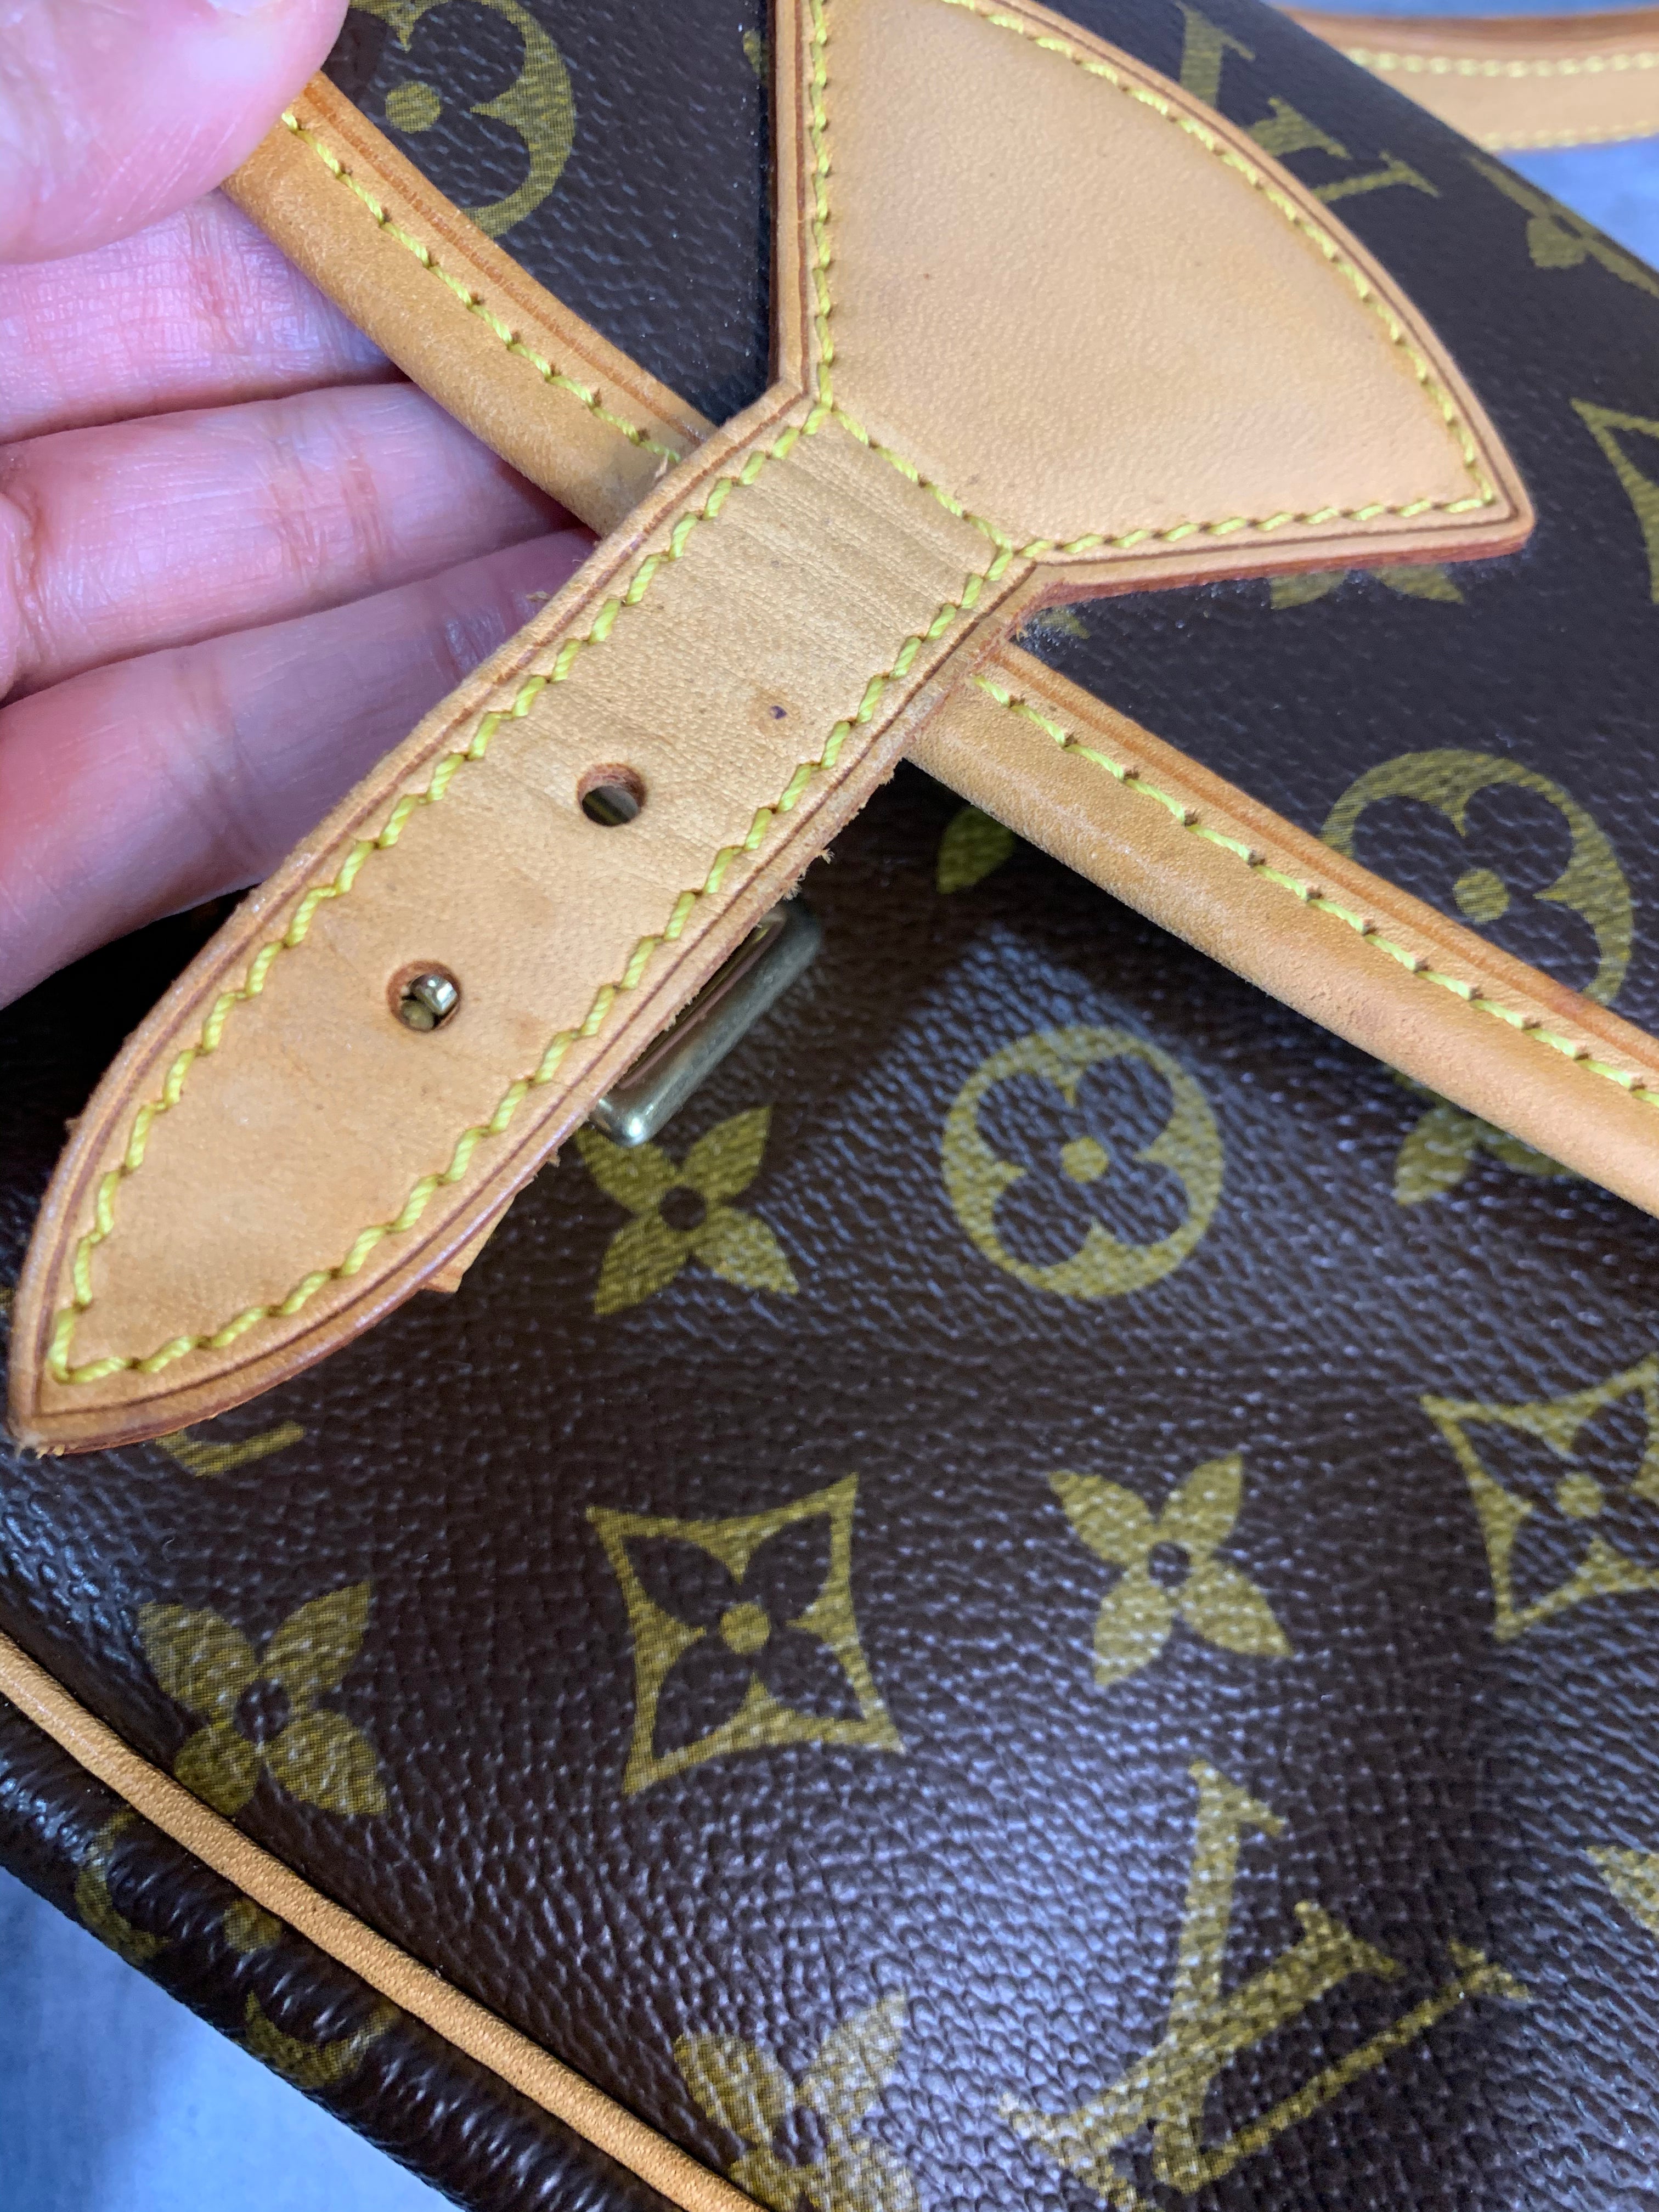 Louis Vuitton 100% Coated Canvas Brown Sologne One Size - 50% off